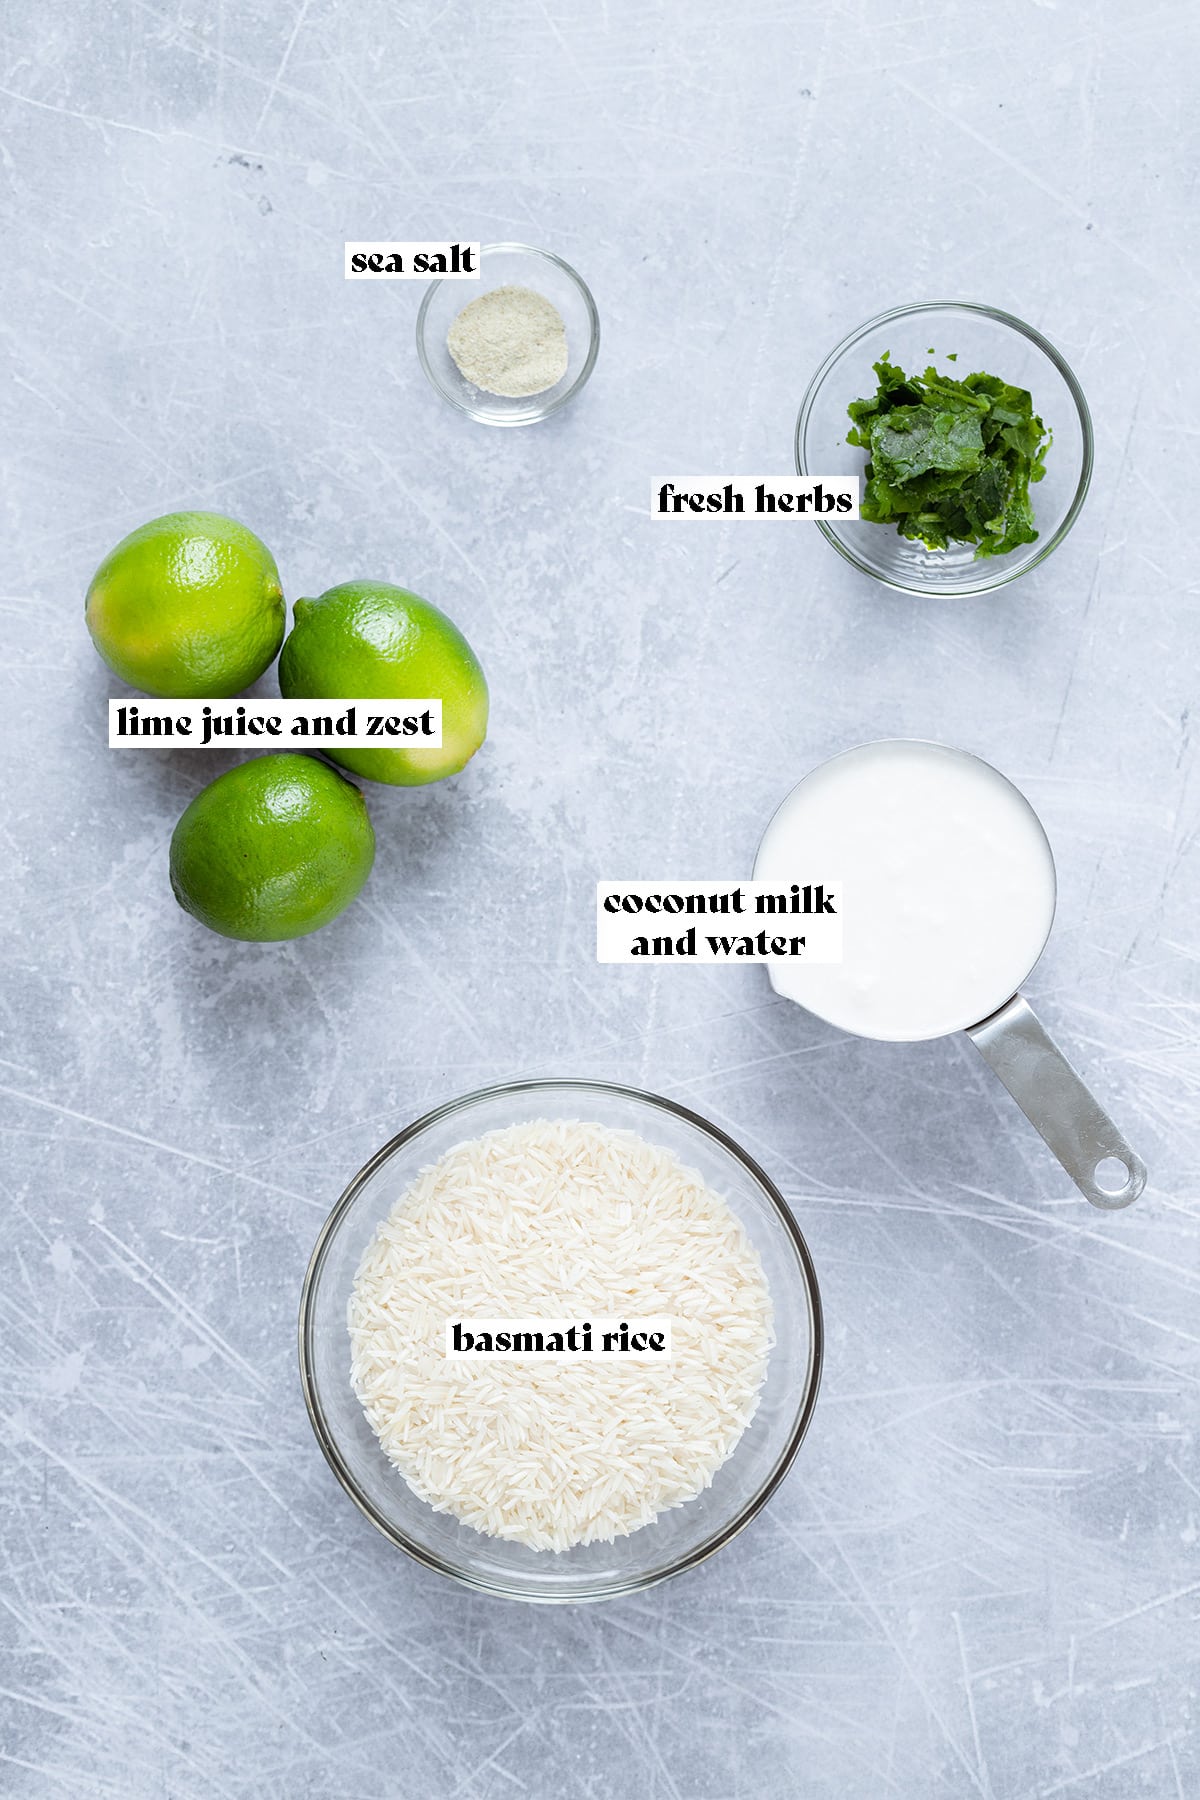 Ingredients for coconut lime rice like coconut milk, rice, and limes laid out on a metal background.